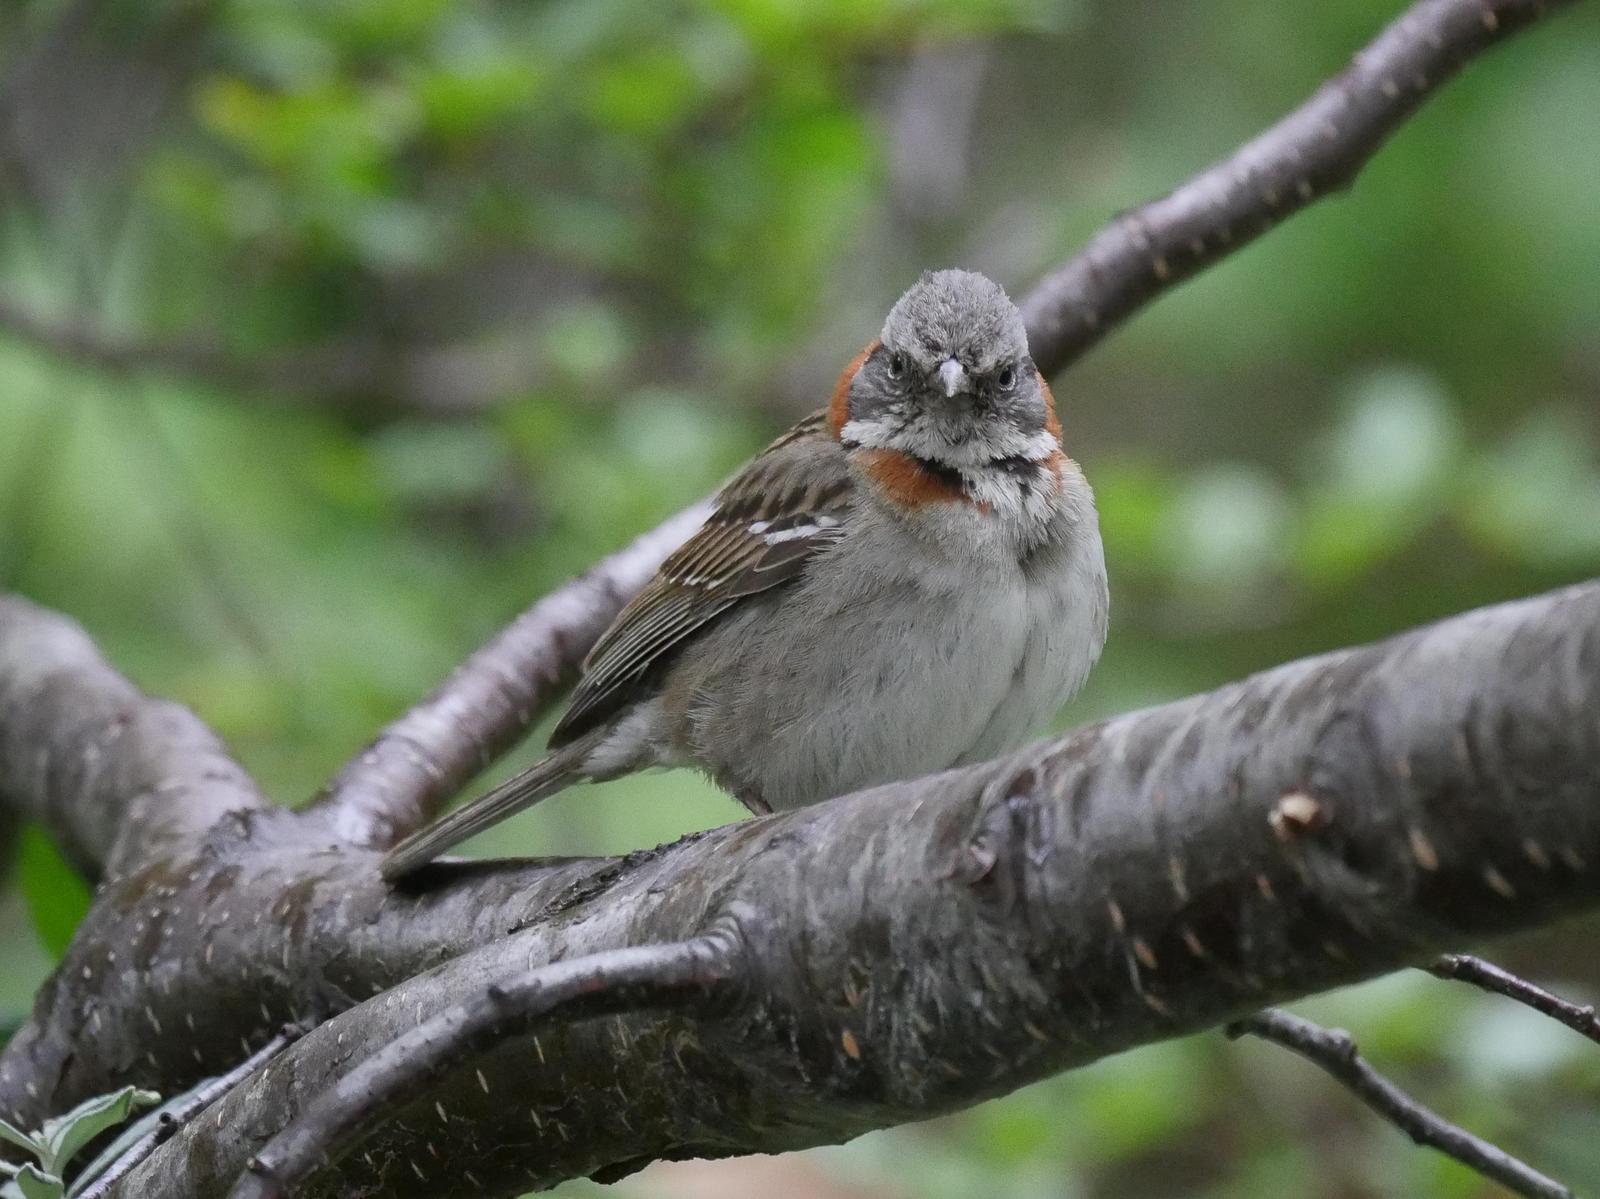 Rufous-collared Sparrow Photo by Peter Lowe